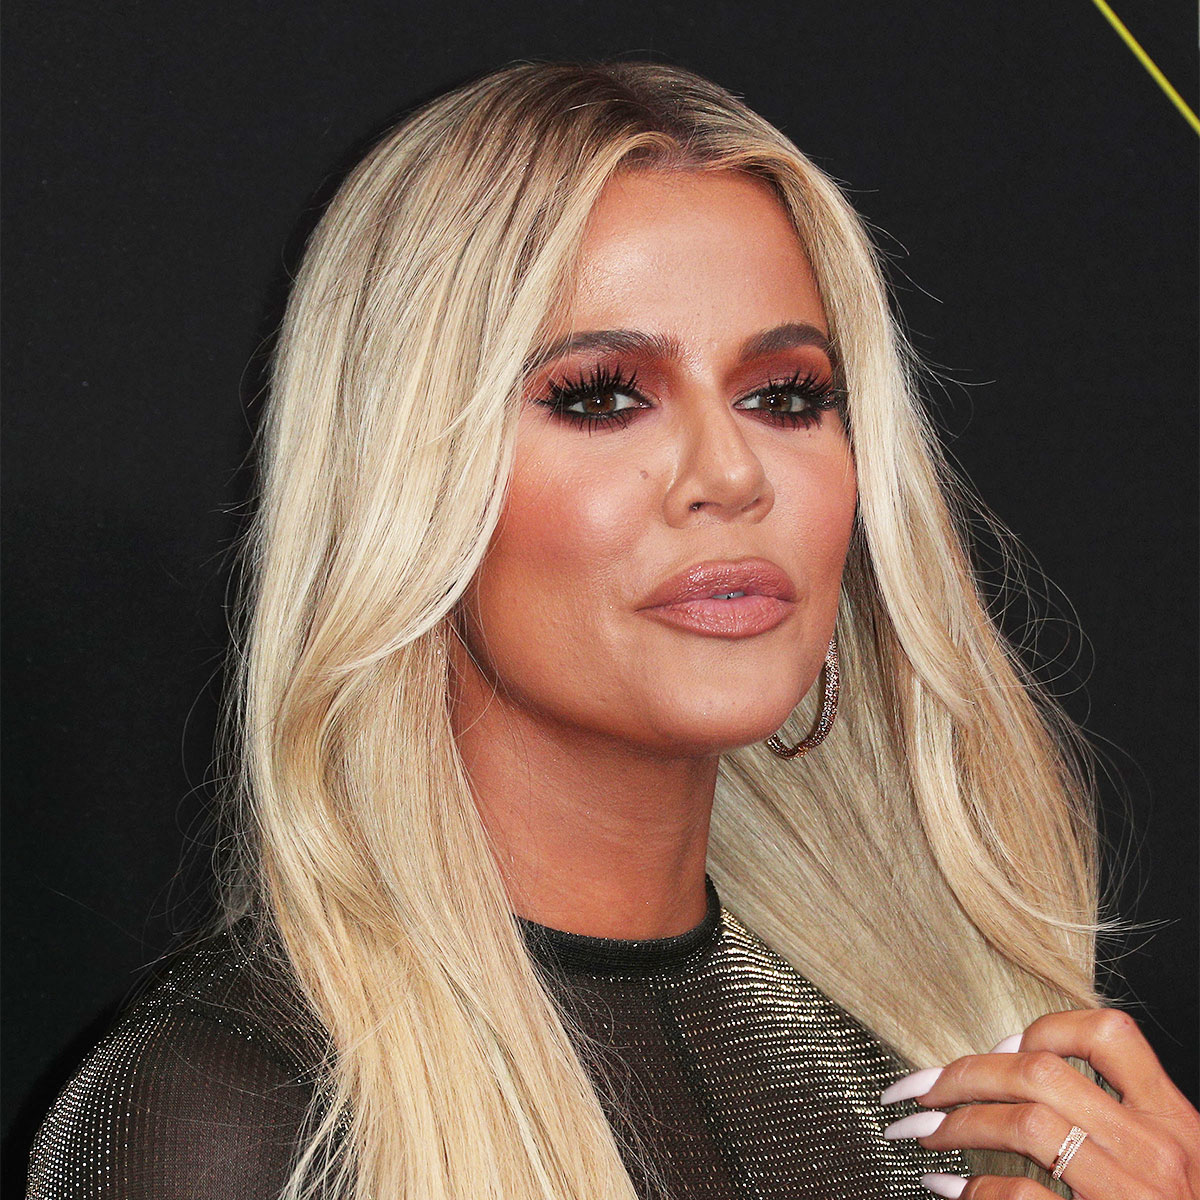 Khloé Kardashian Fans Express Their 'Sadness' After Seeing Throwback Photos  Of The Star 'Before Plastic Surgery' - SHEfinds